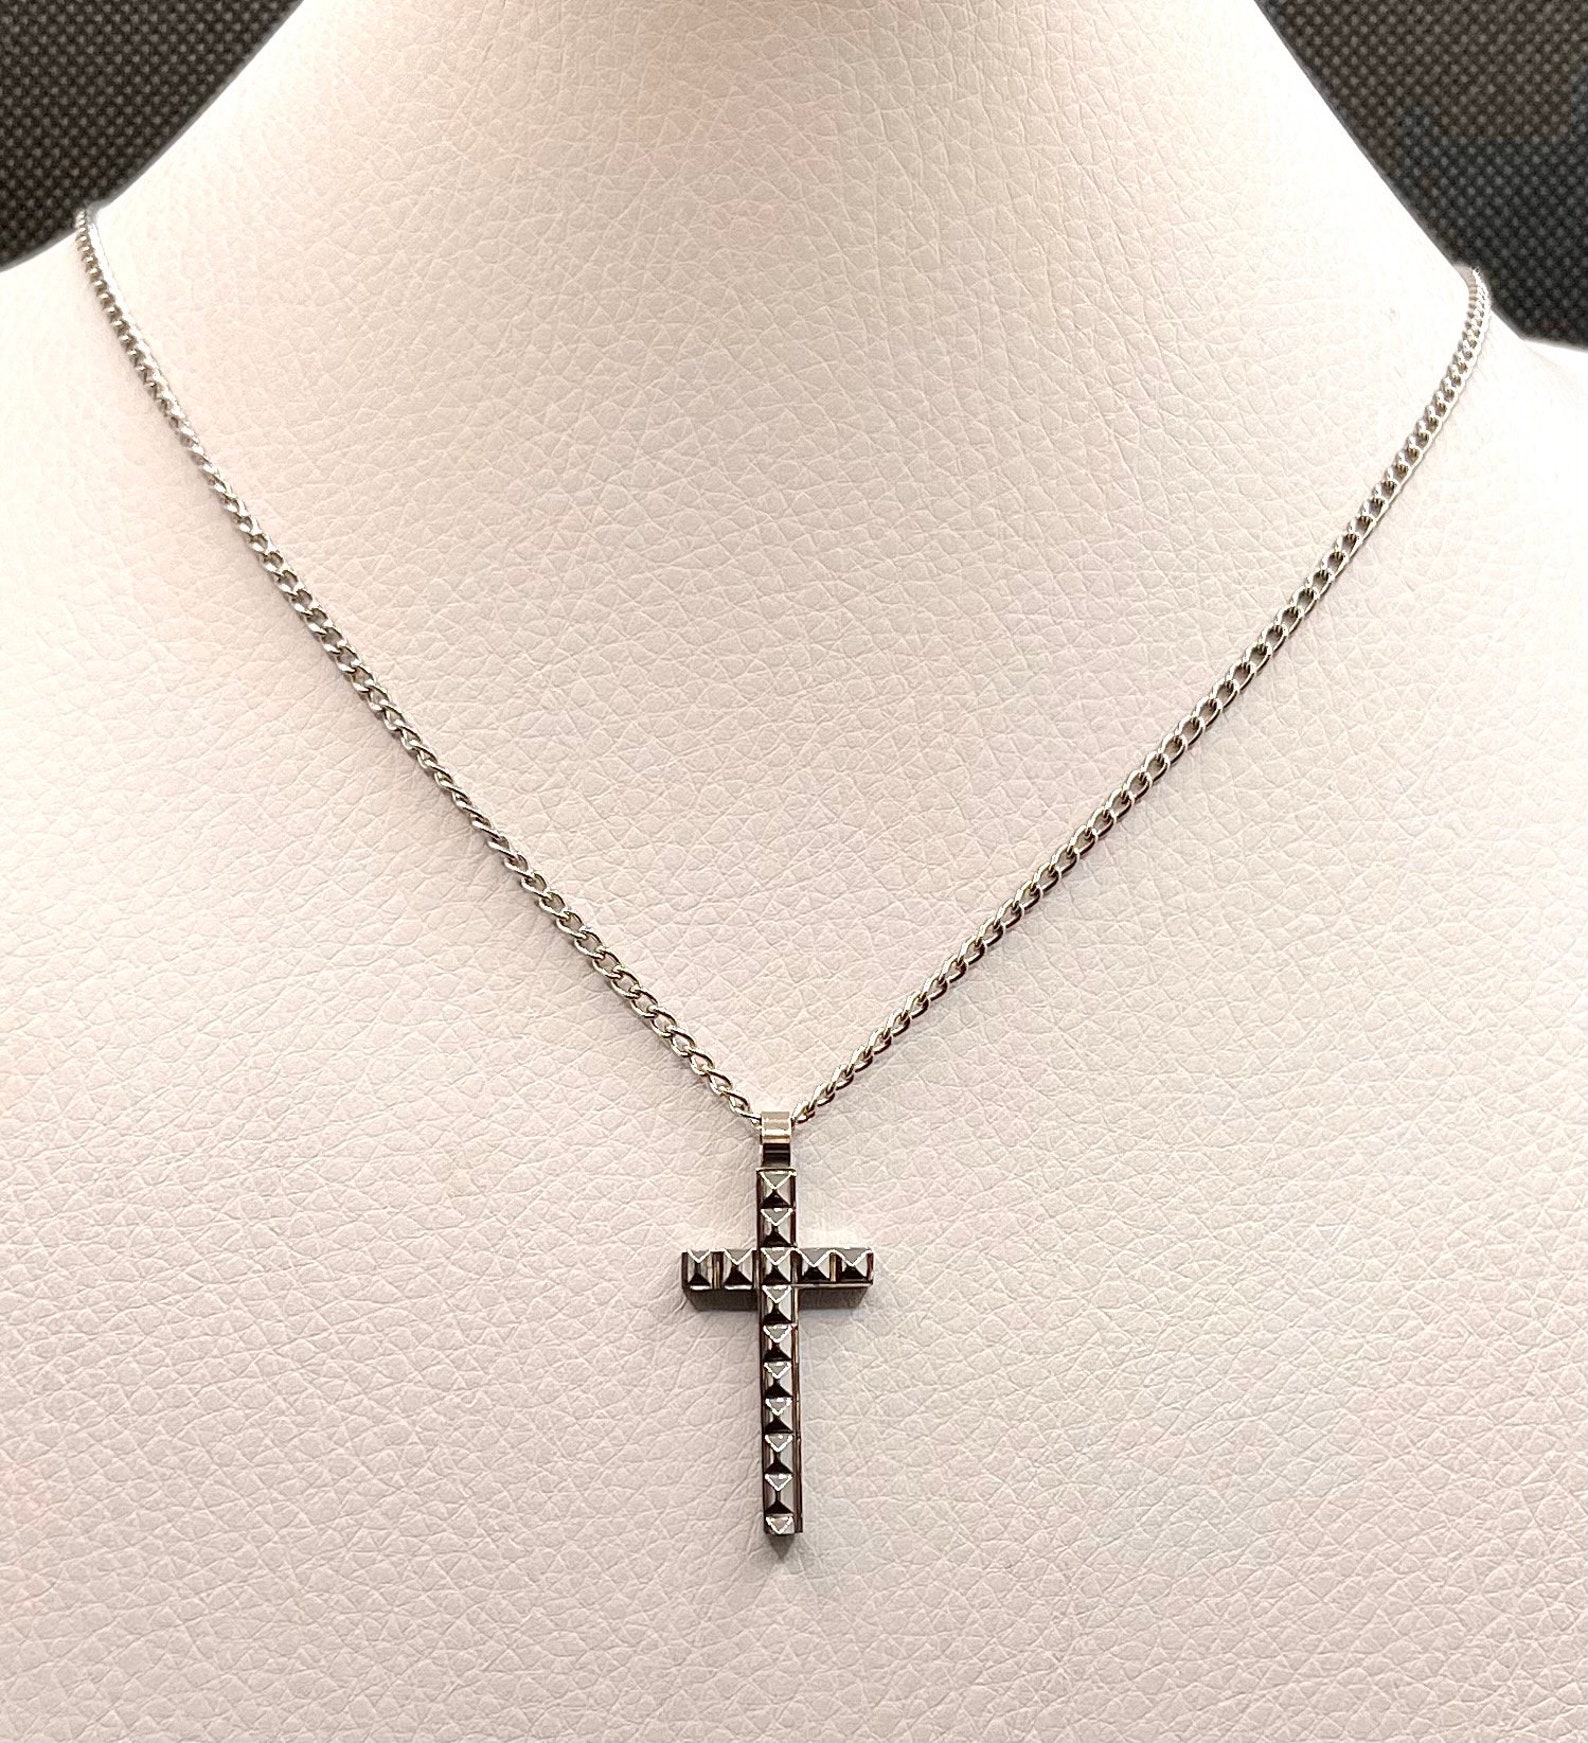 Tungsten Cross Necklace with Stainless Steel Chain. High | Etsy